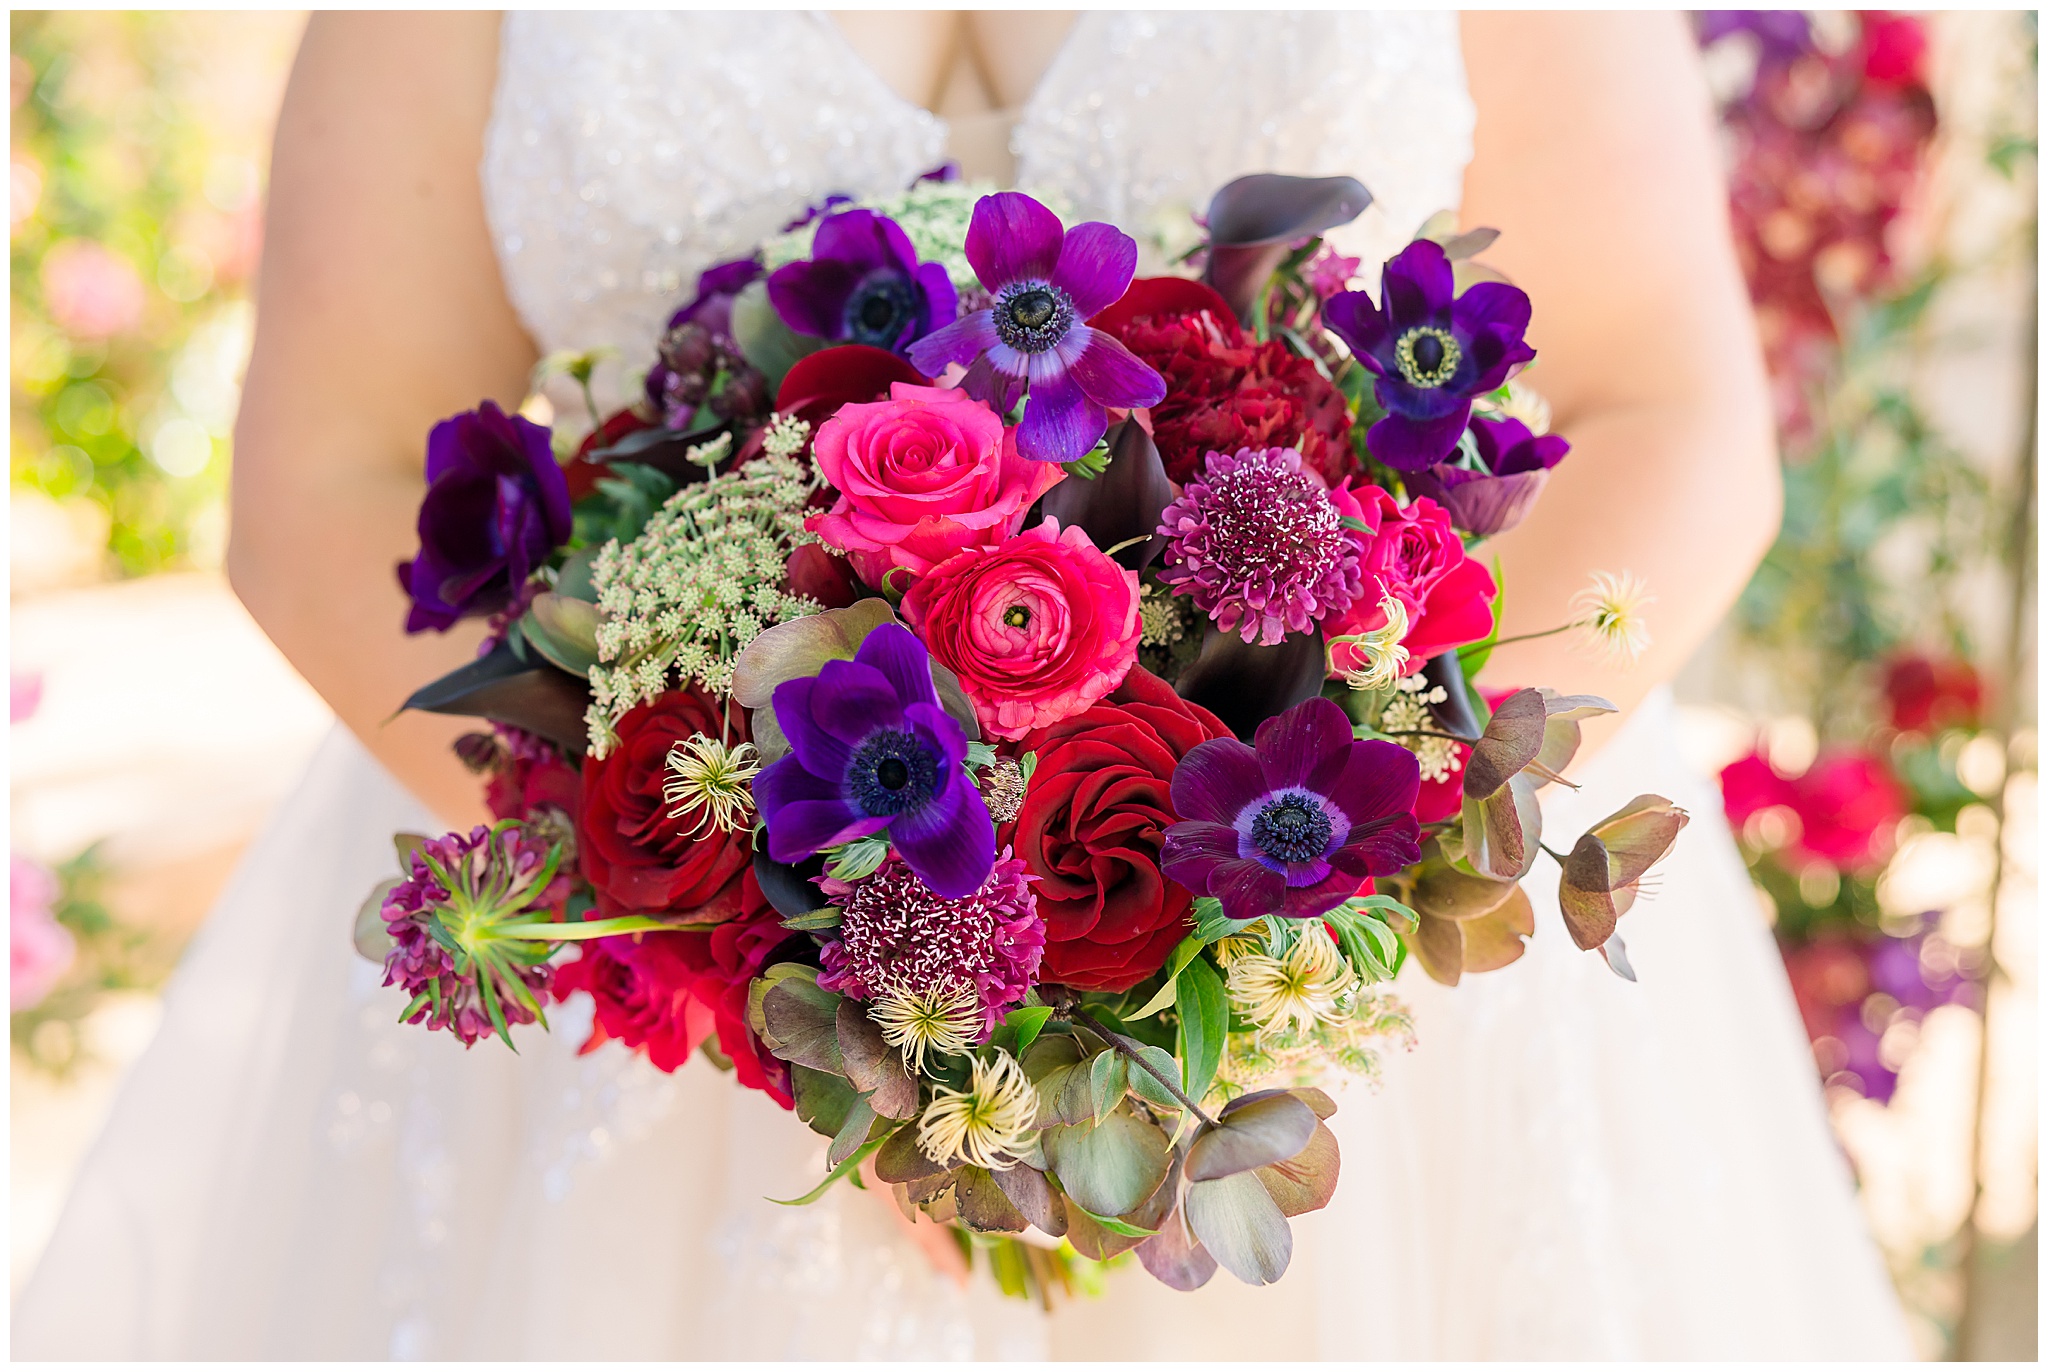 pink, purple, red florals with greenery